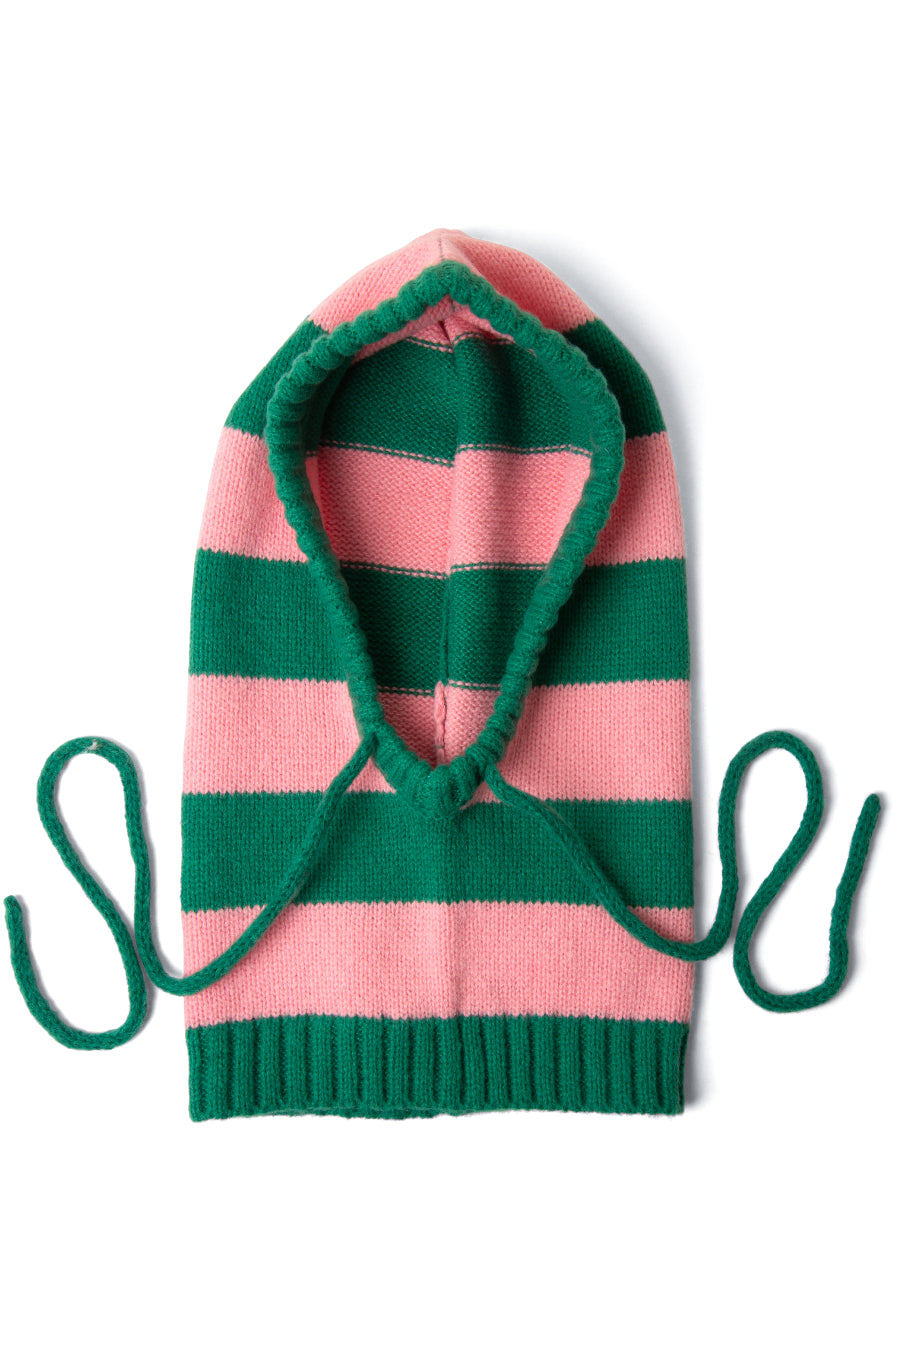 HOOD WITH TIE IN PINK GREEN STRIPE